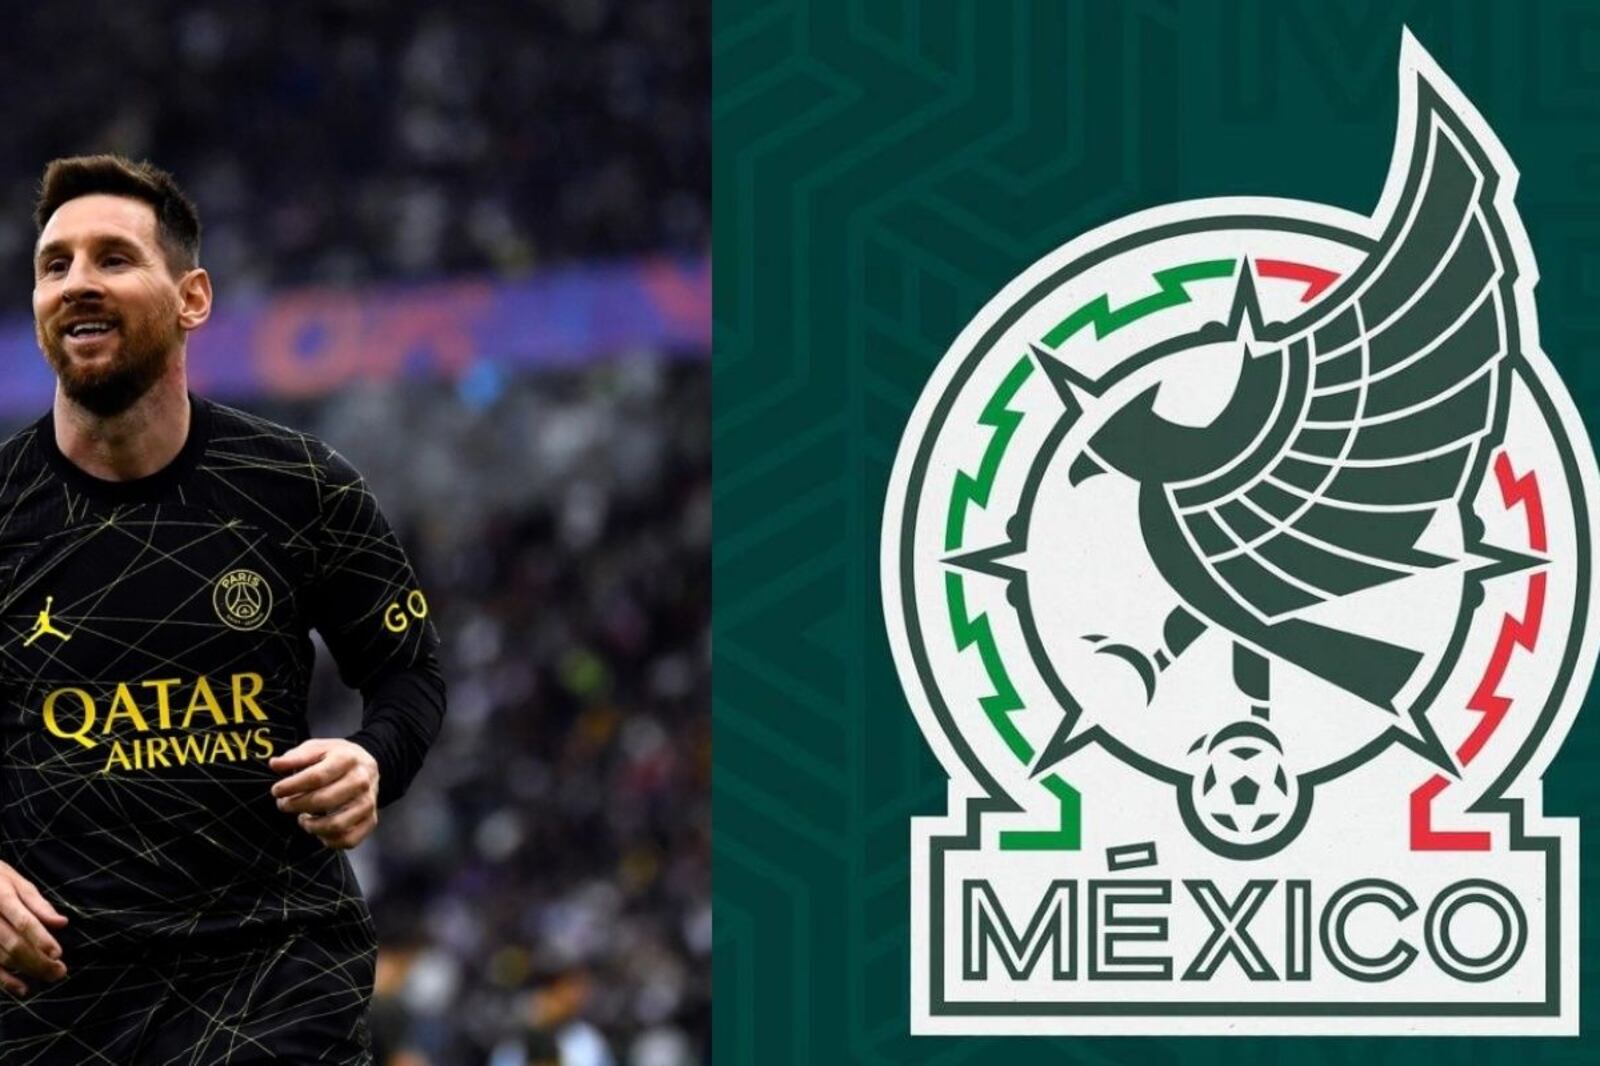 The Mexican player who will be Messi's partner next season